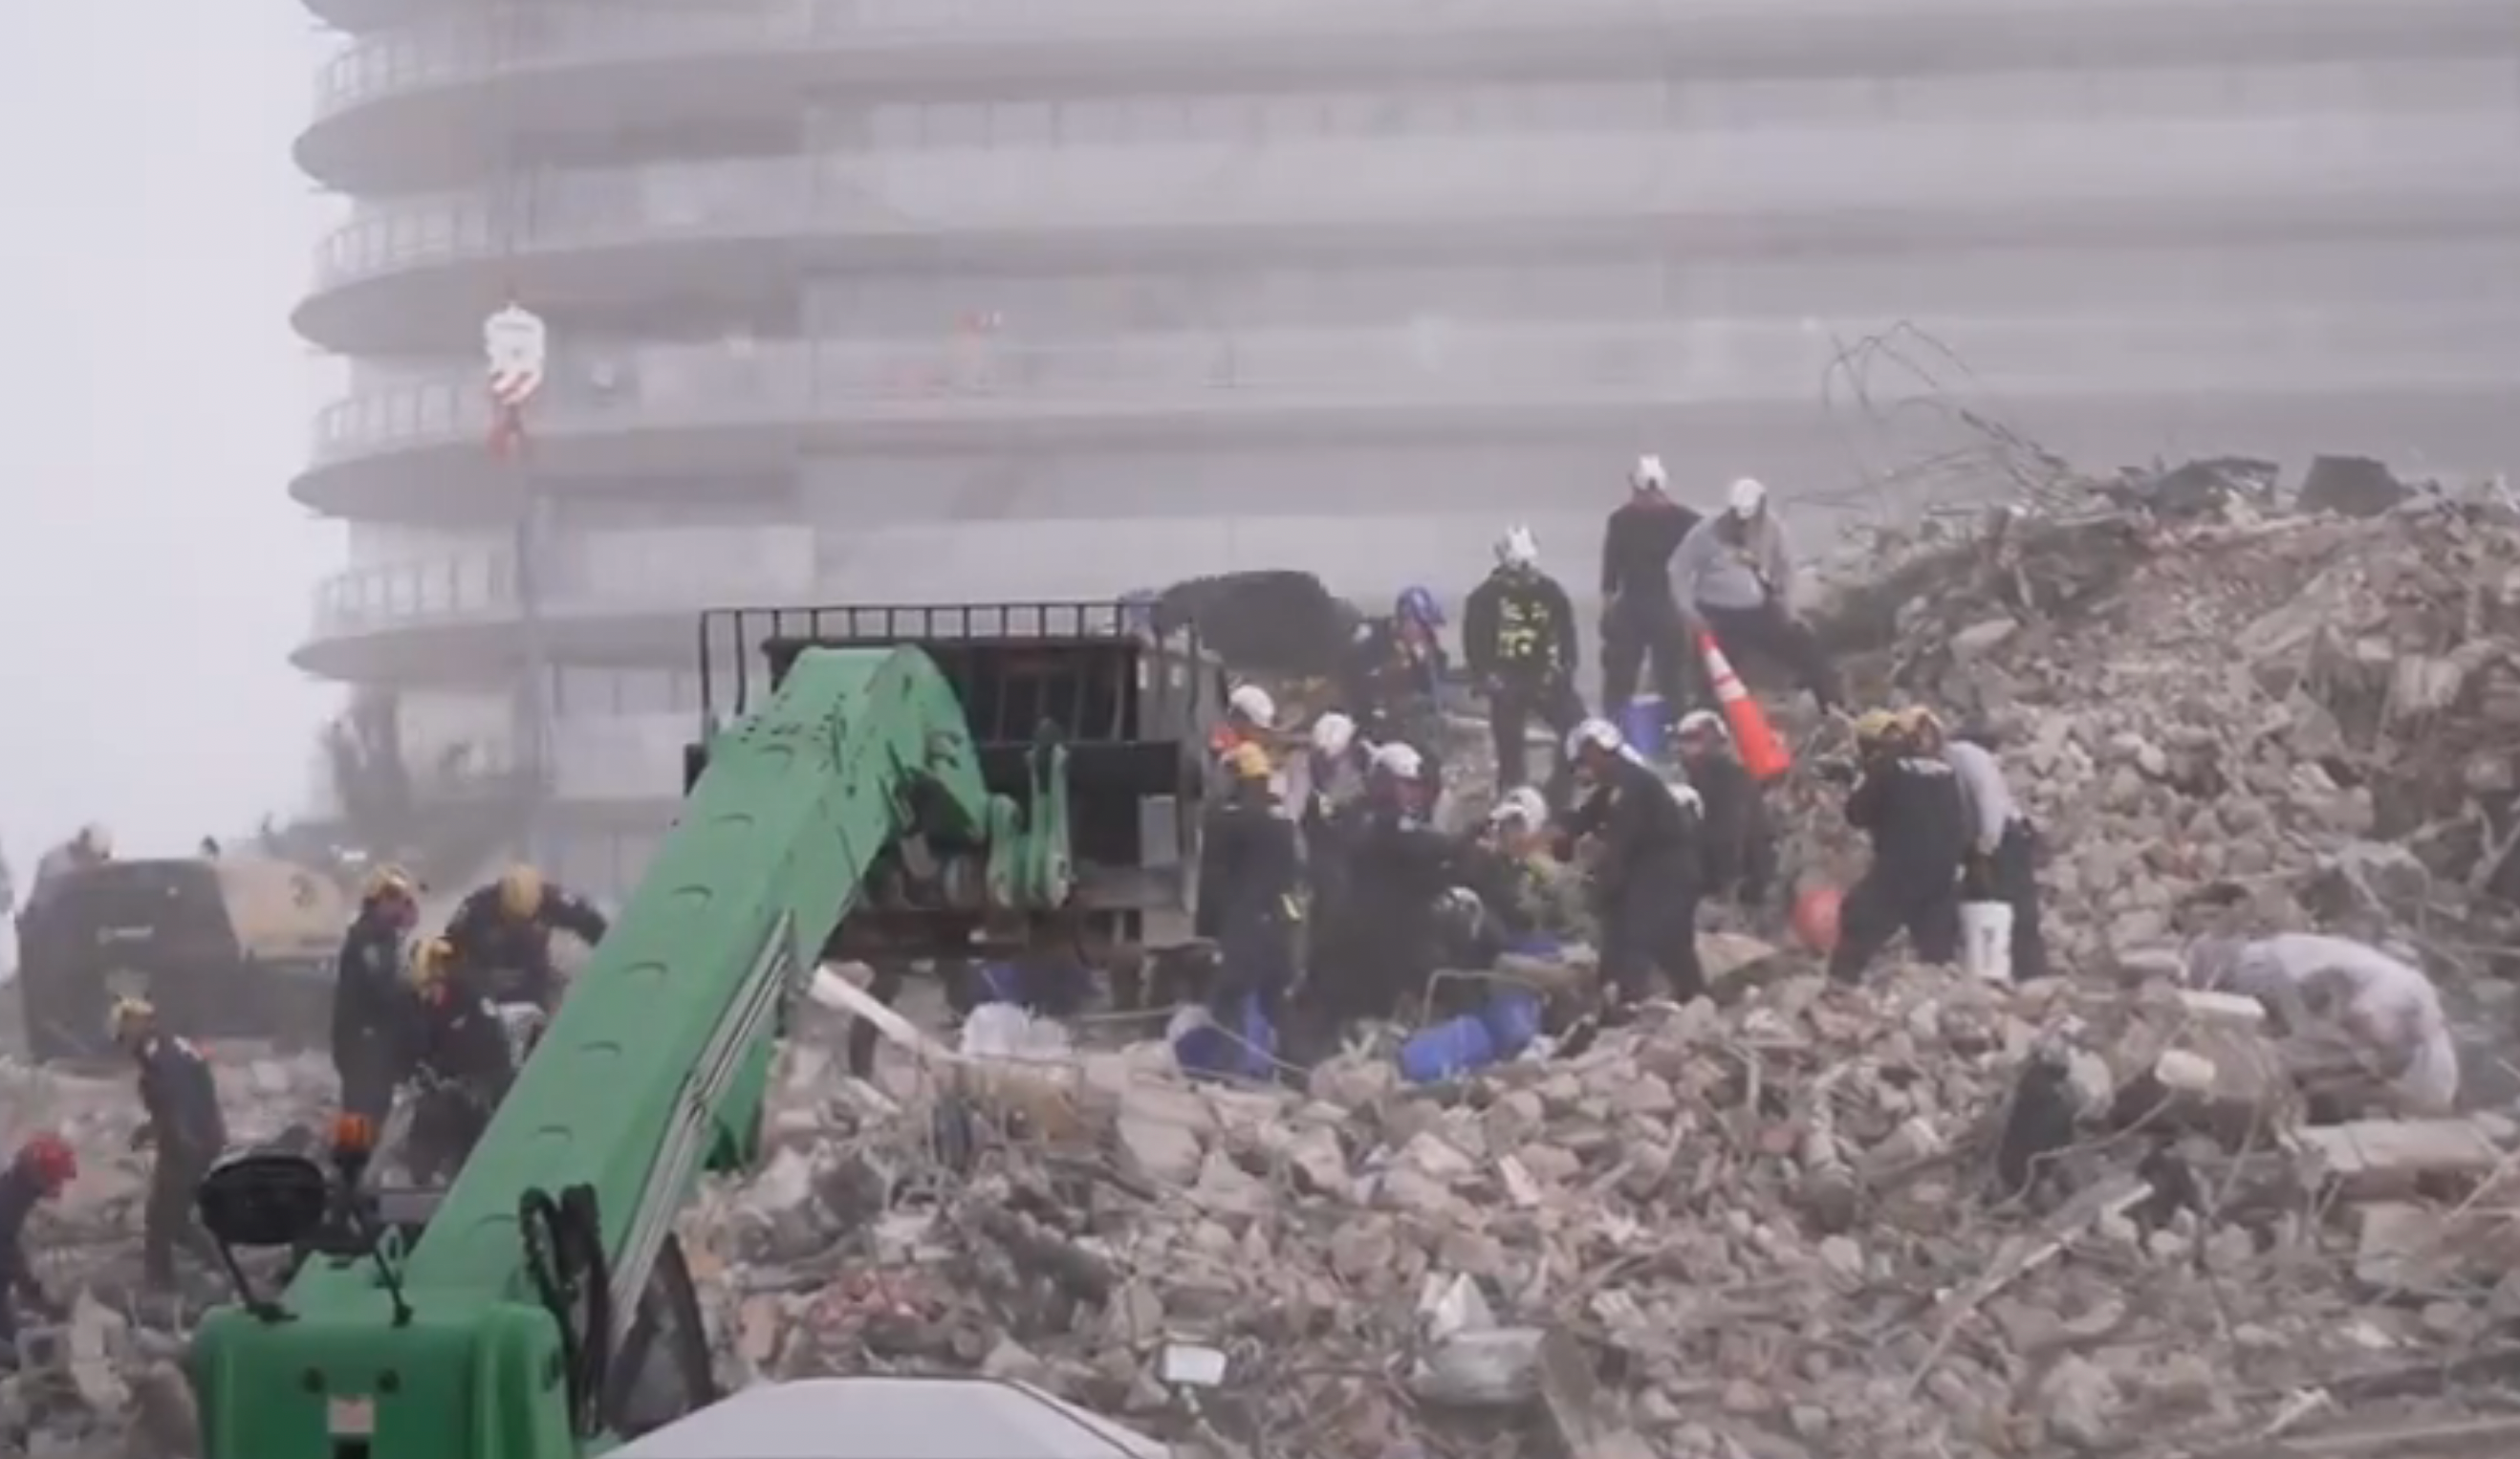 Workers are battling the elements as they attempt to find survivors